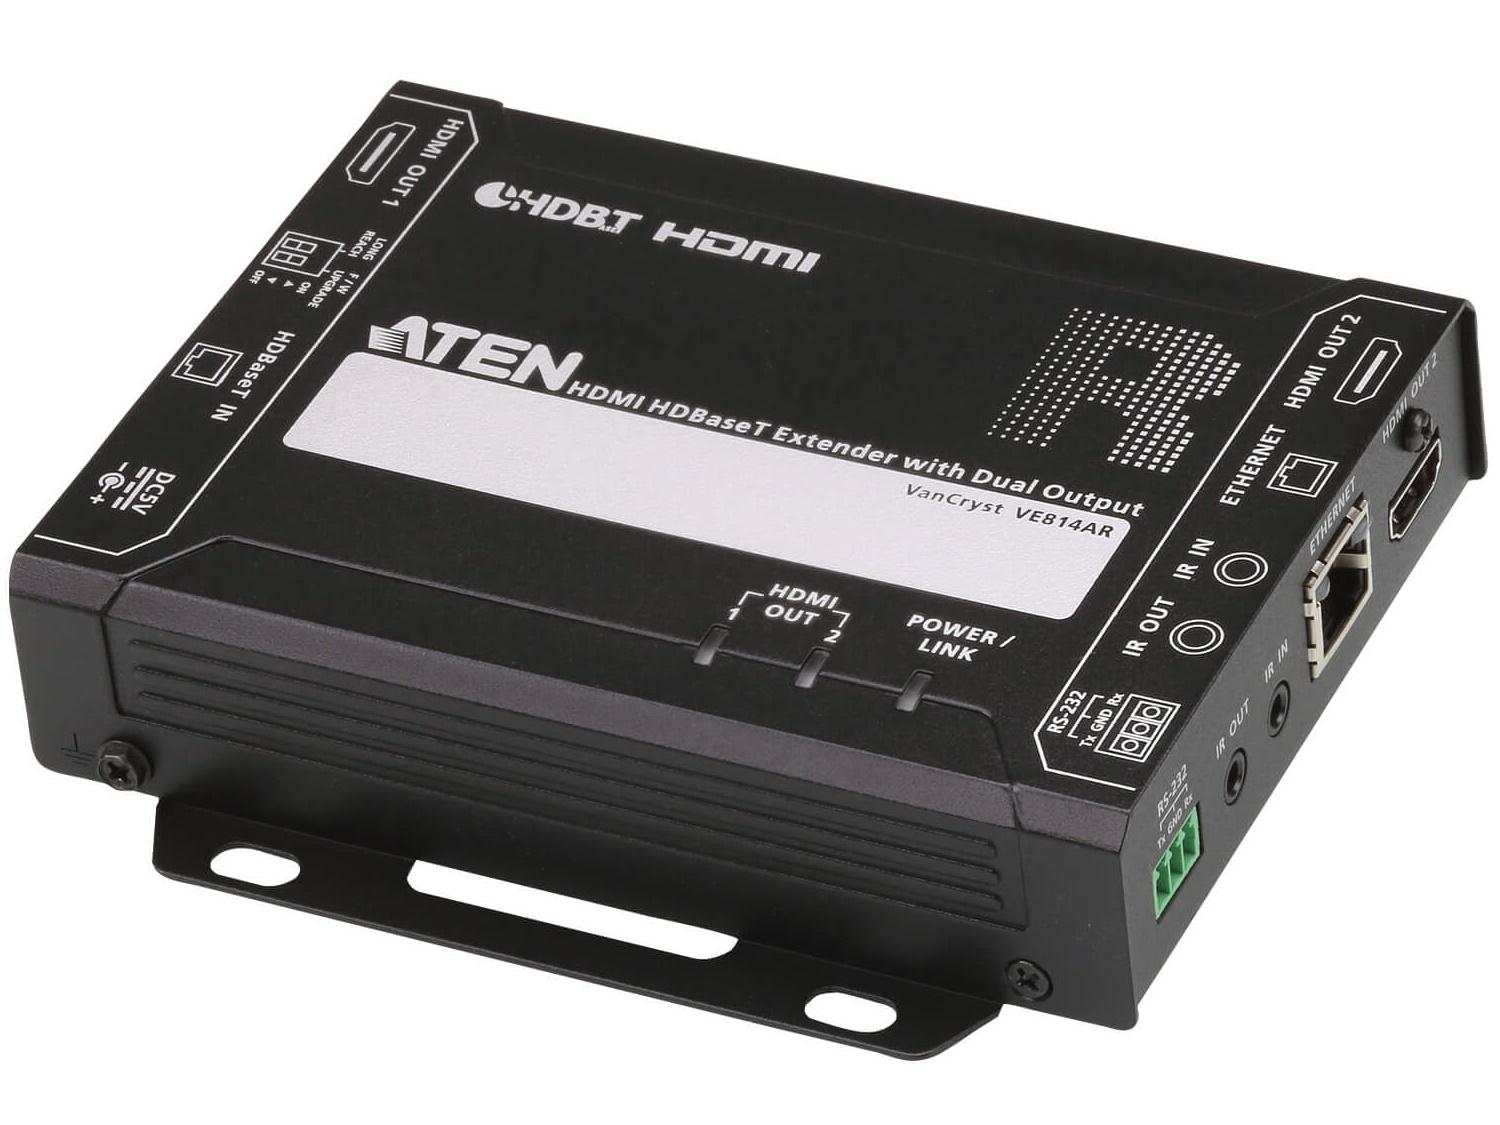 VE814AR HDMI HDBaseT Class A Extender (Receiver) with Dual Output (4K/100m) by Aten